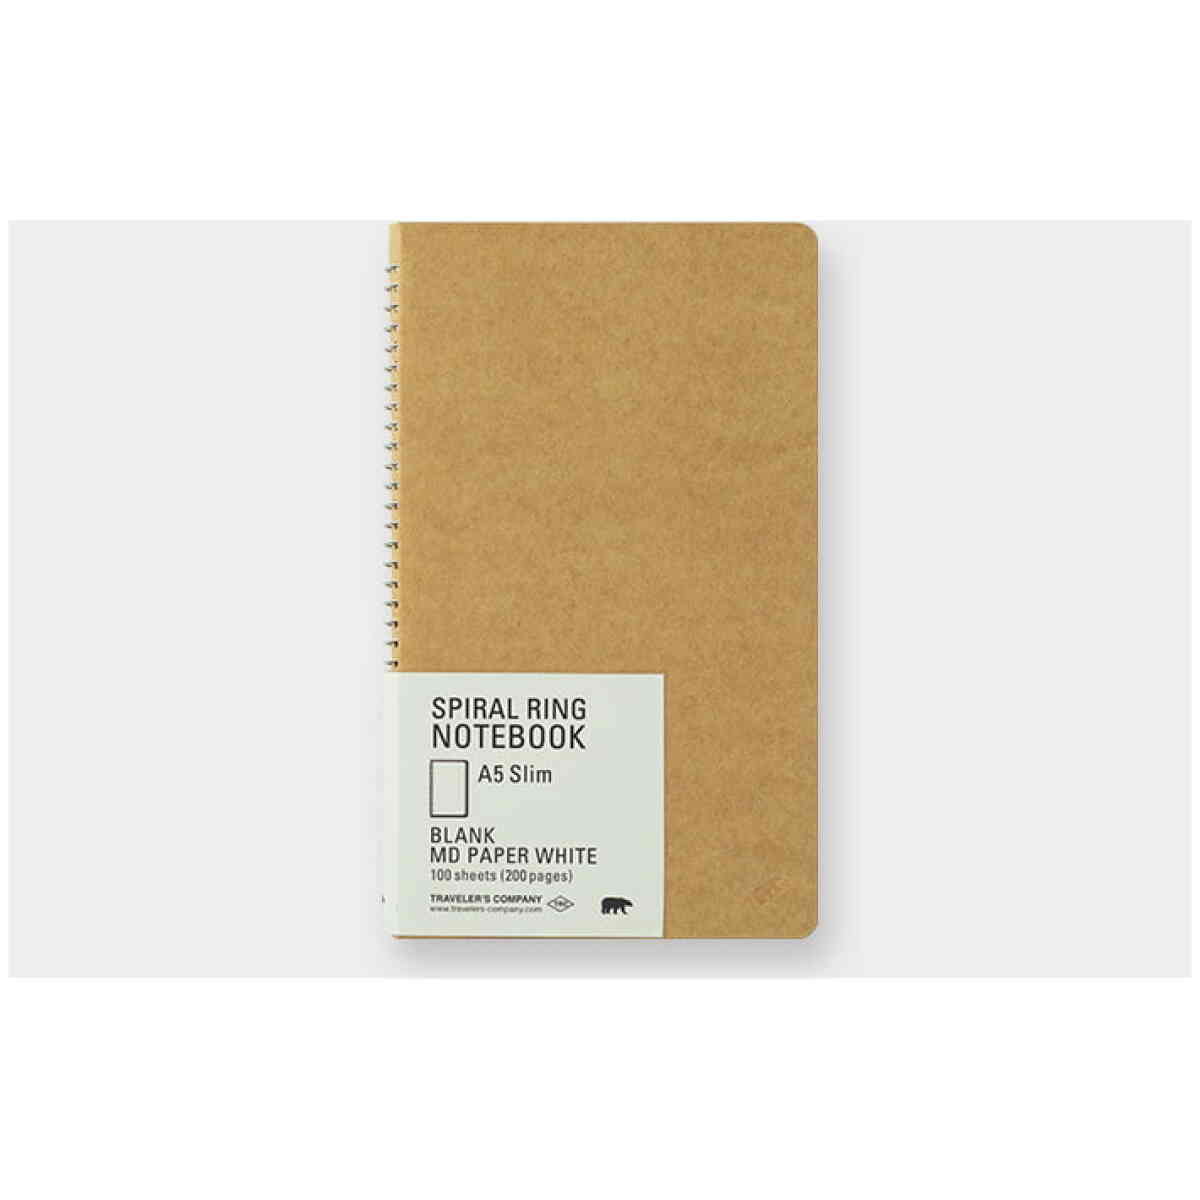 TRC SPIRAL RING NOTEBOOK A5 Slim MD White